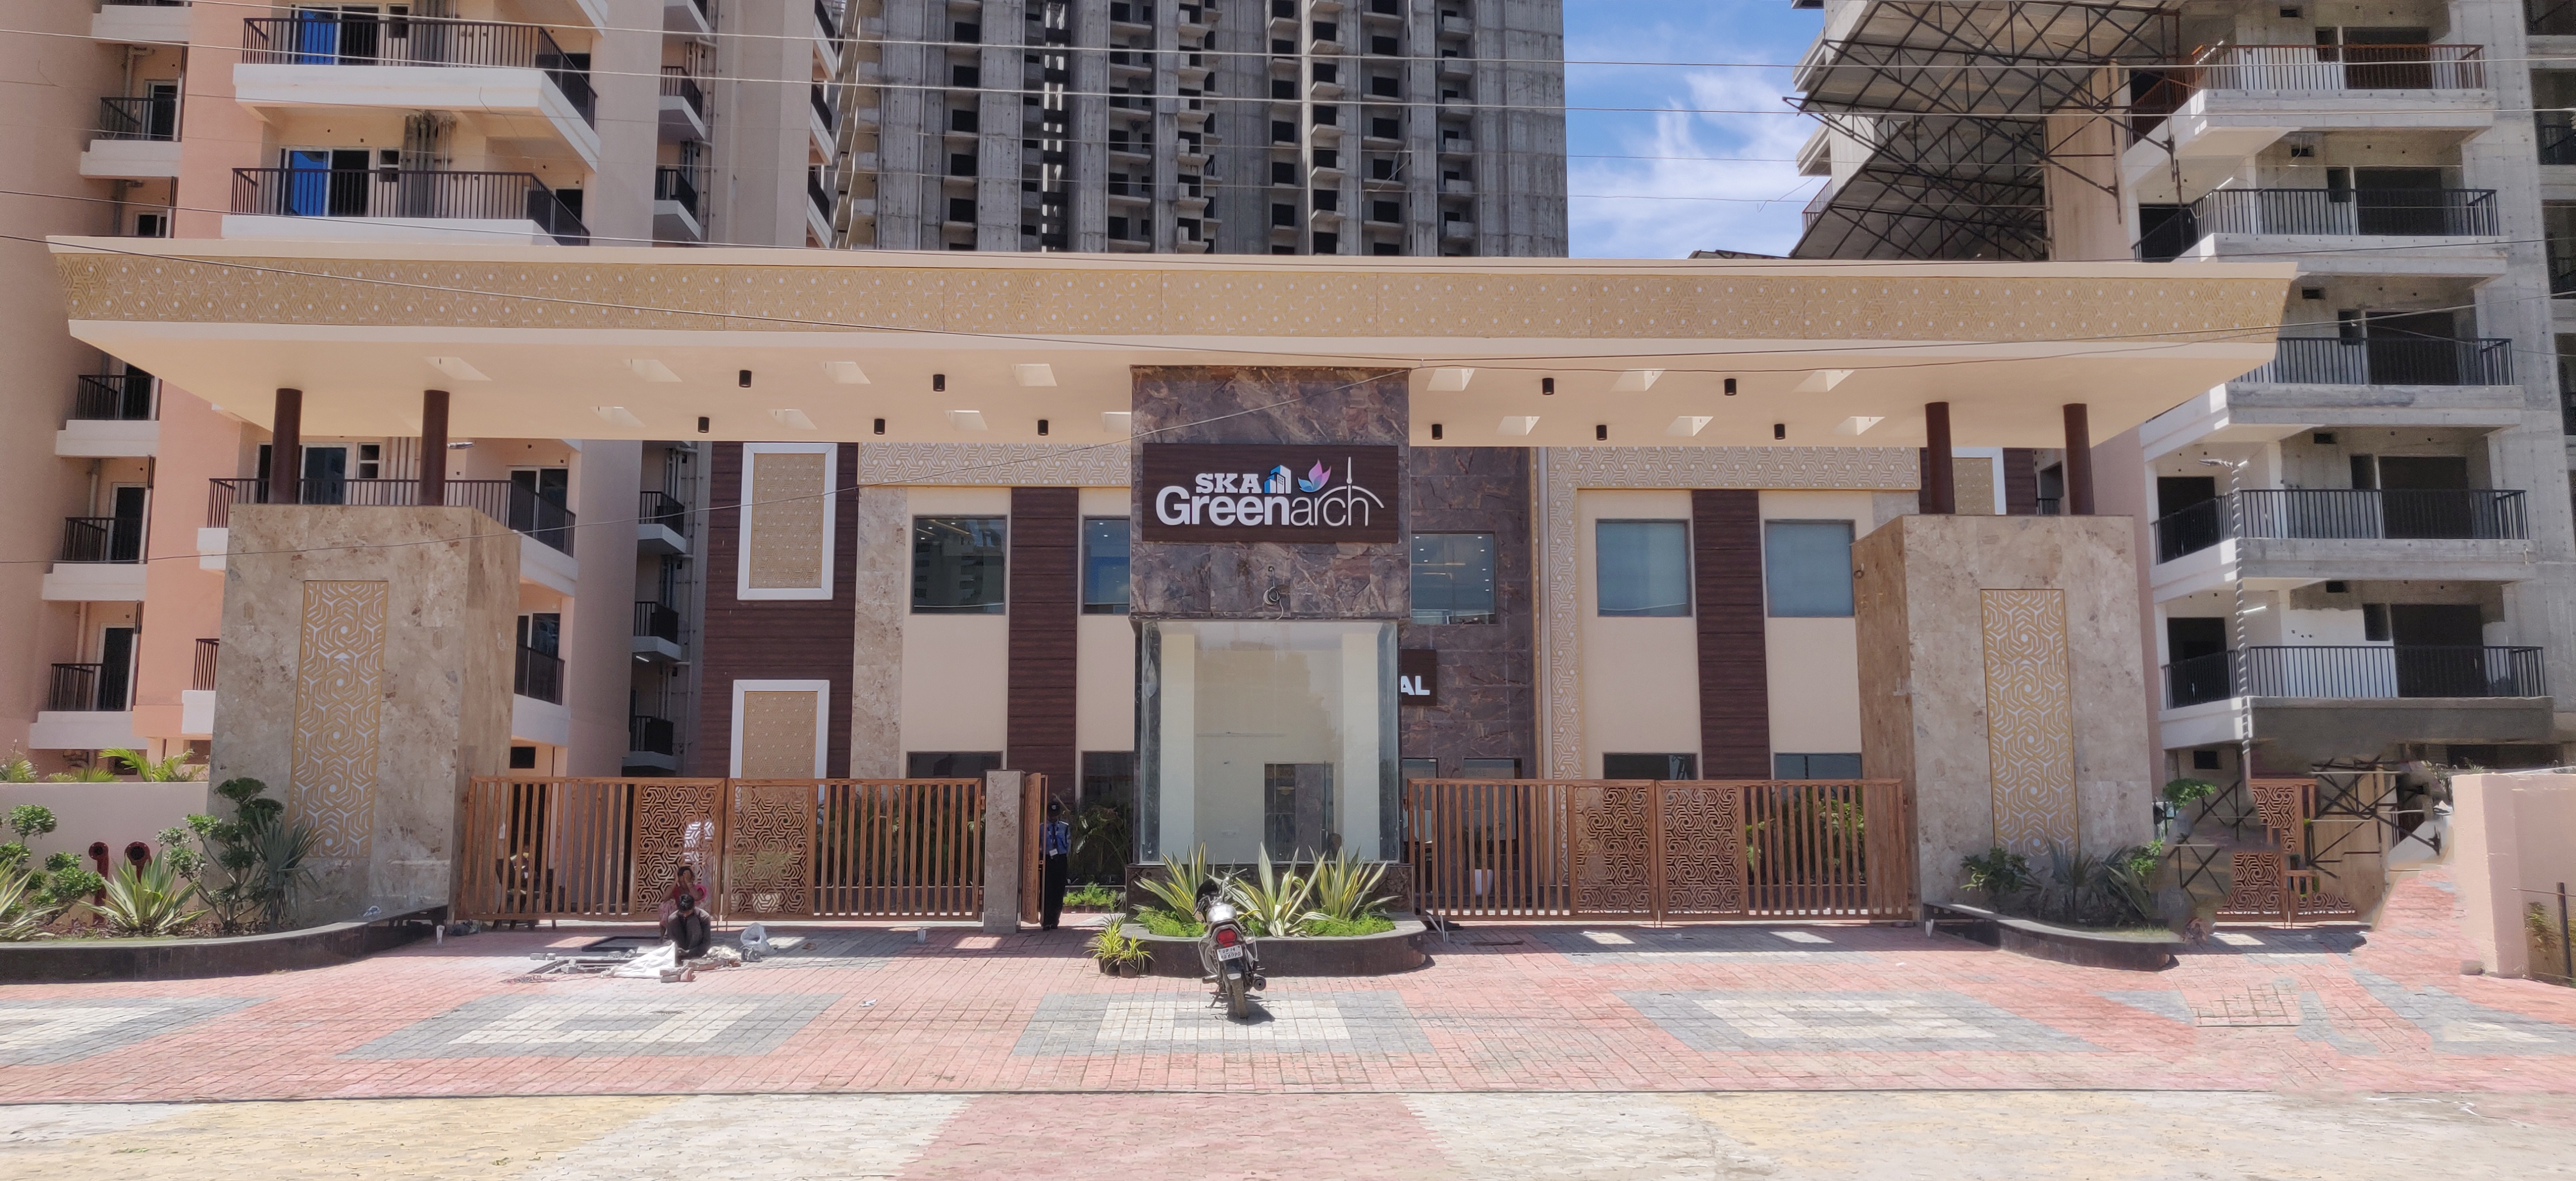 2 bhk flats in Greater Noida West, 3 bhk flats in Greater Noida West